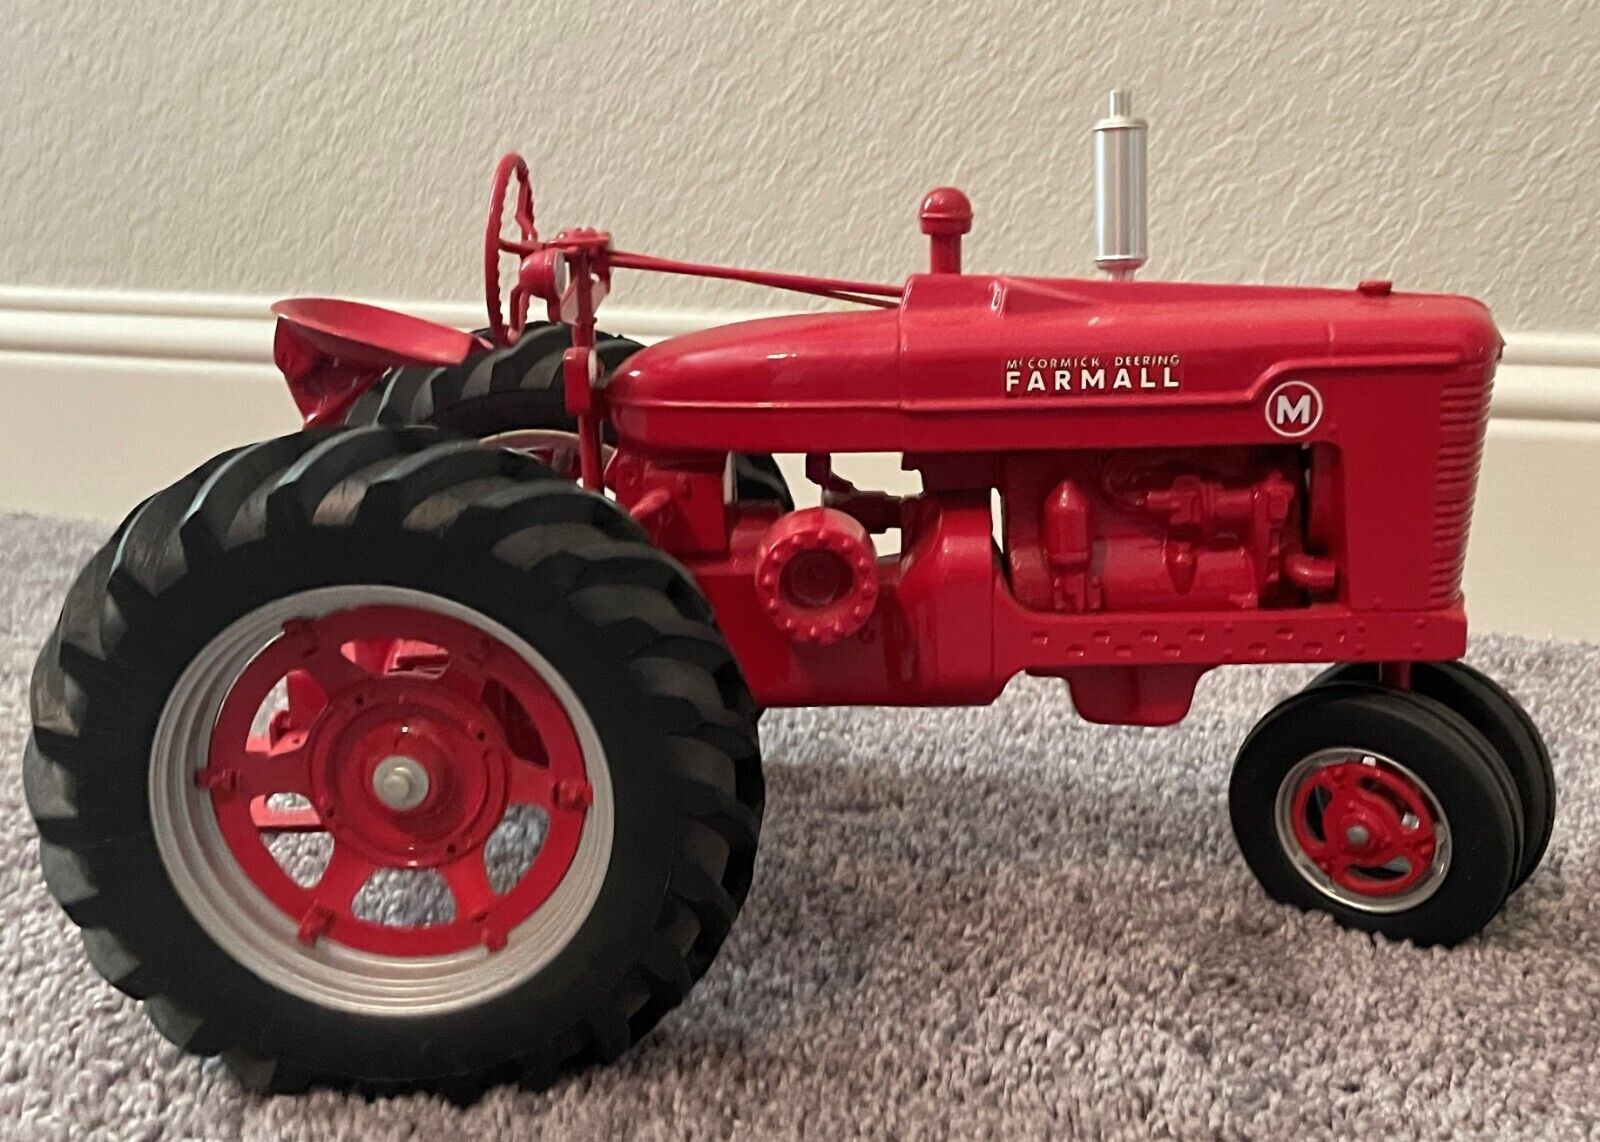 McCormick Deering Farmall M Narrow Front-End Tractor - Prime Condition